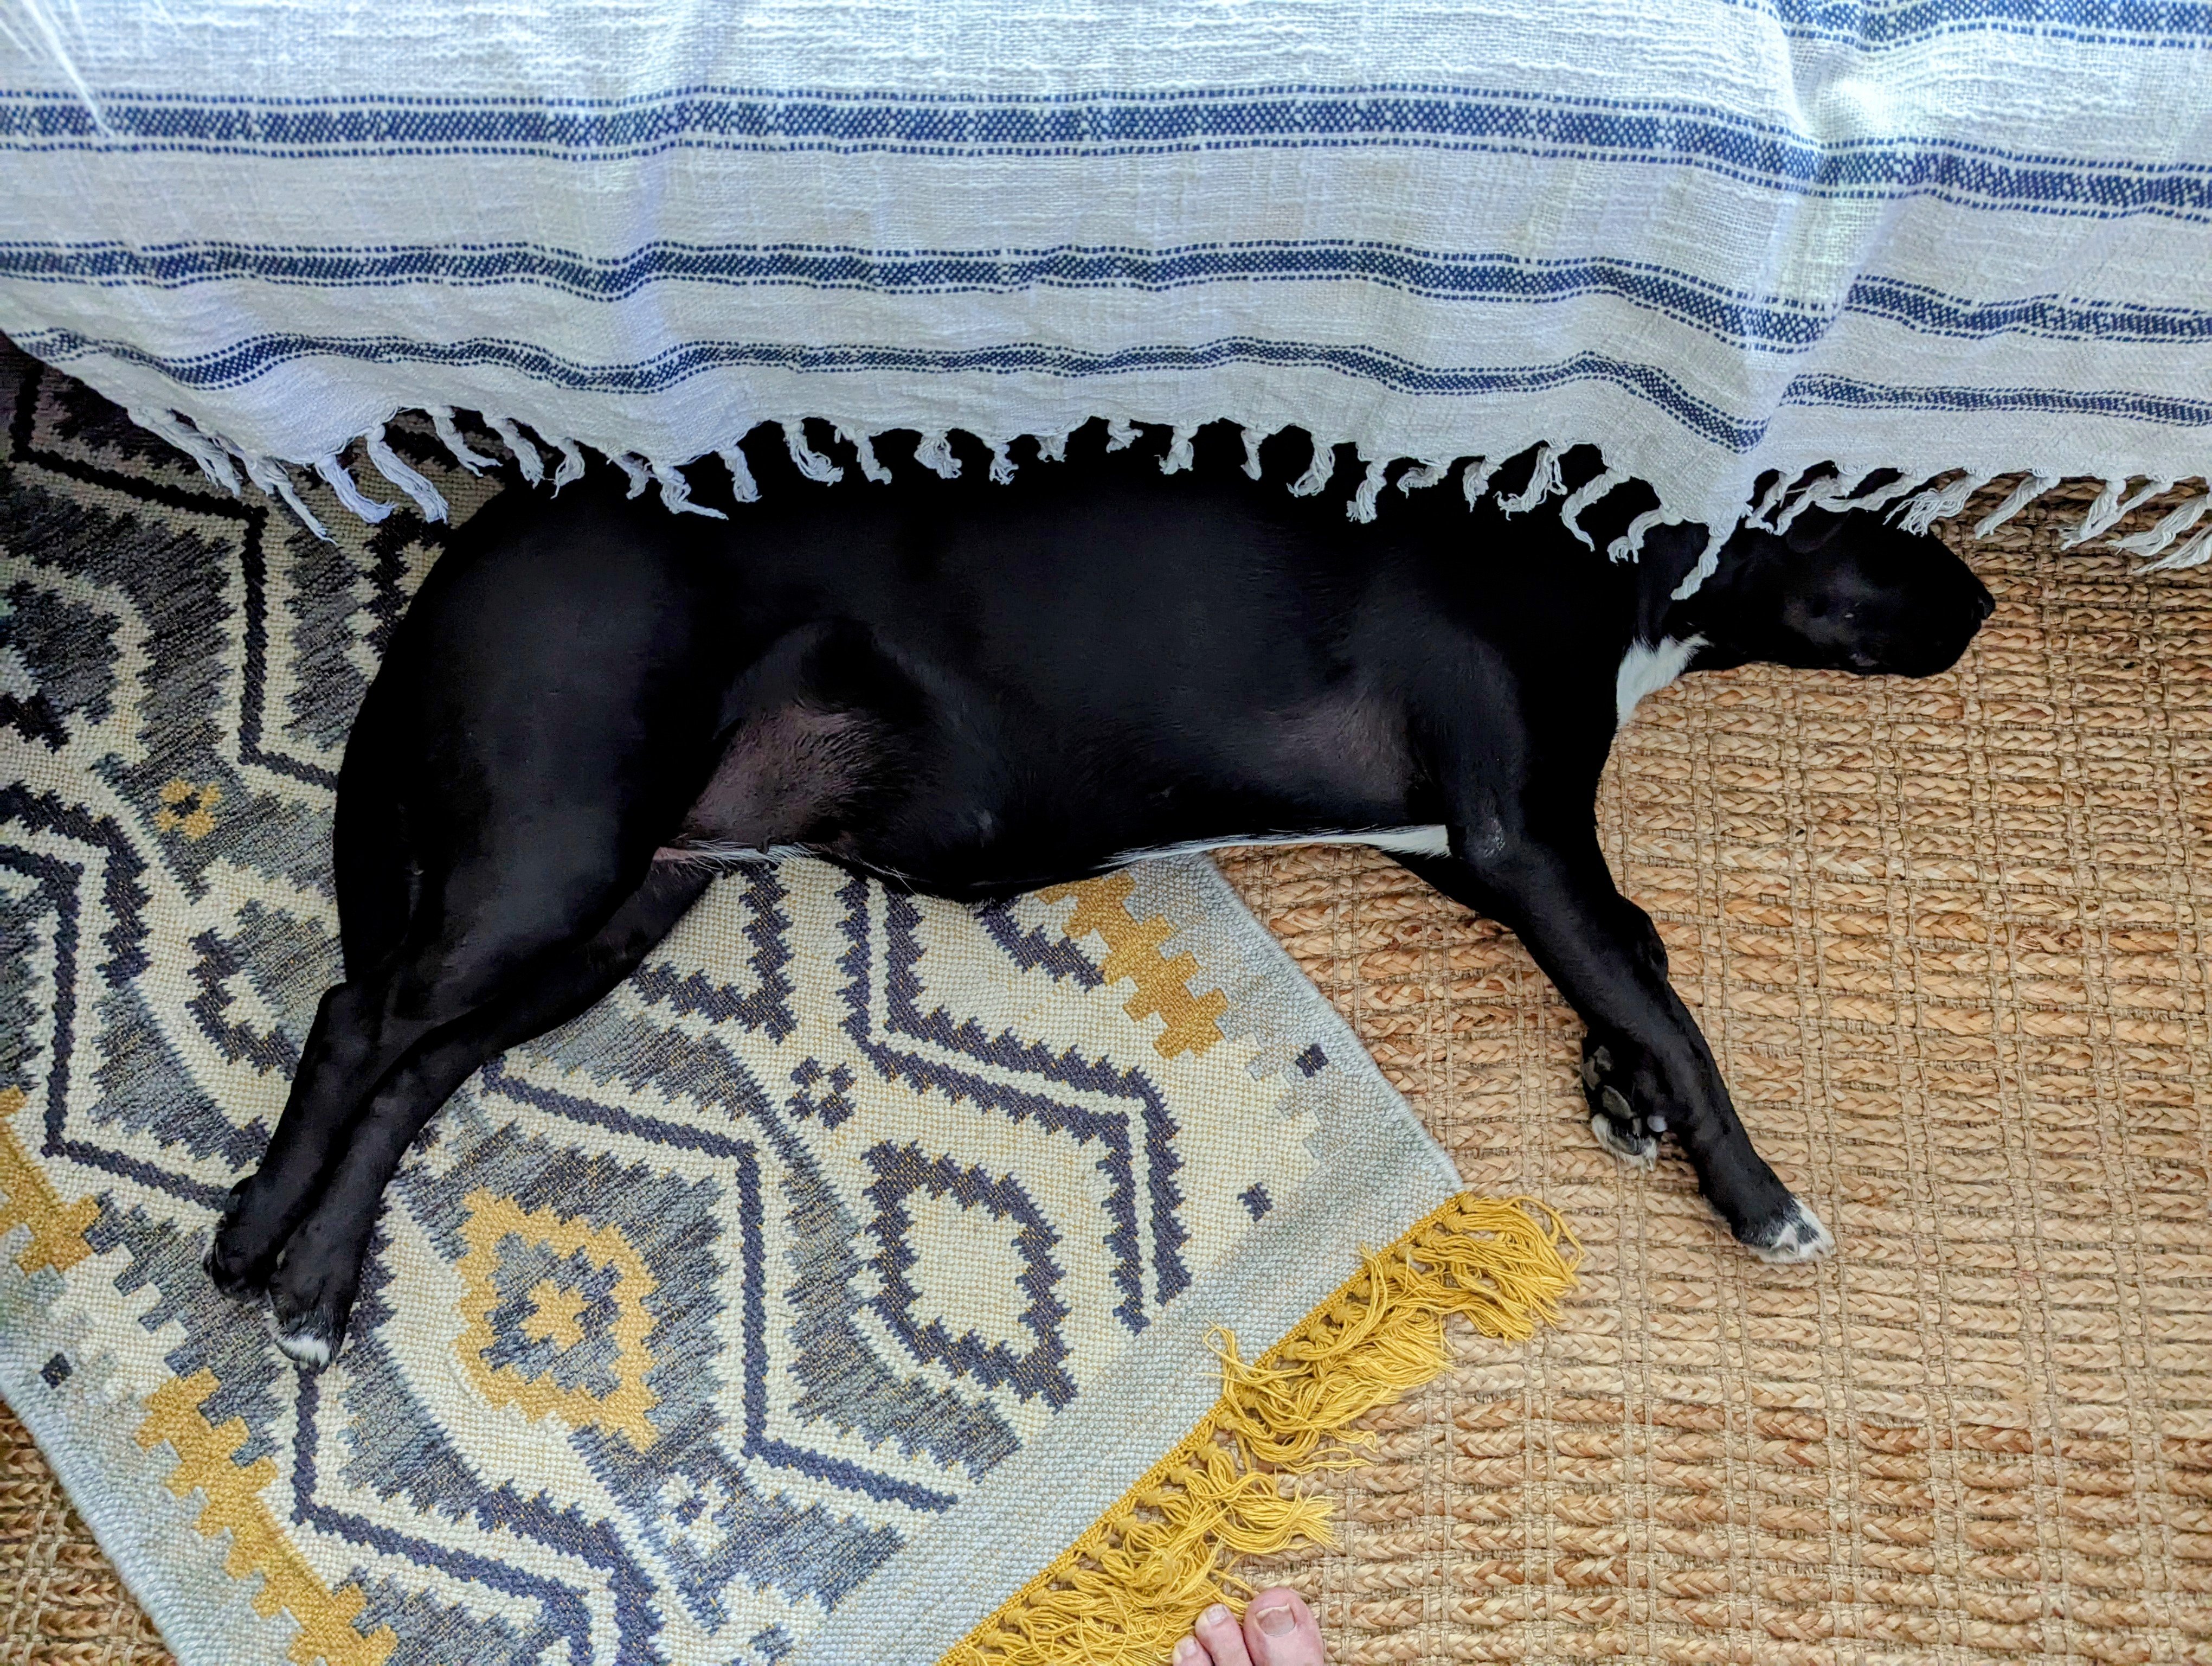 Black dog laying on her side on rugs, partially obscured by couch covering. 